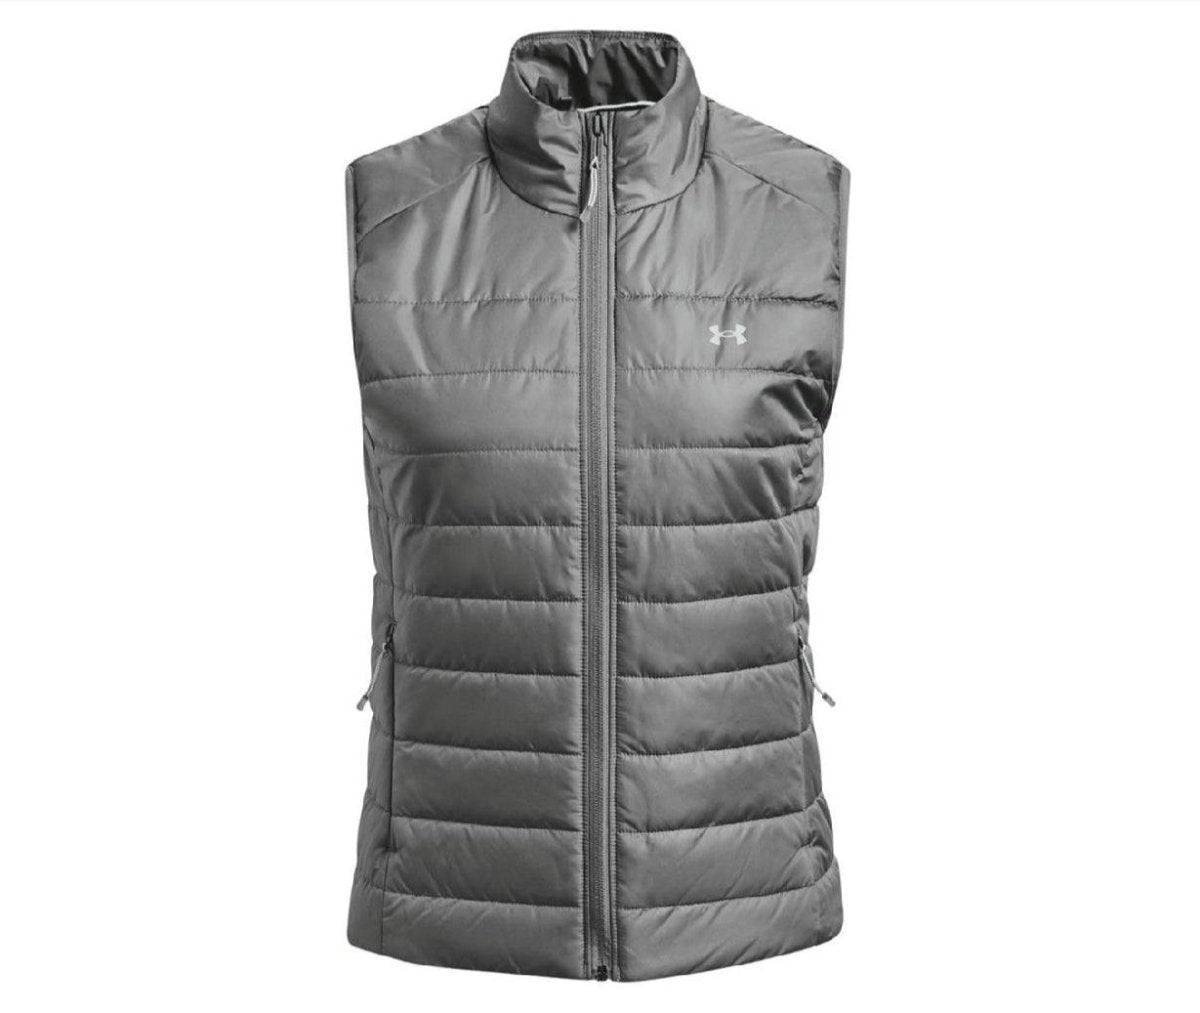 UA Storm Insulated Vest - The Shoe Collective